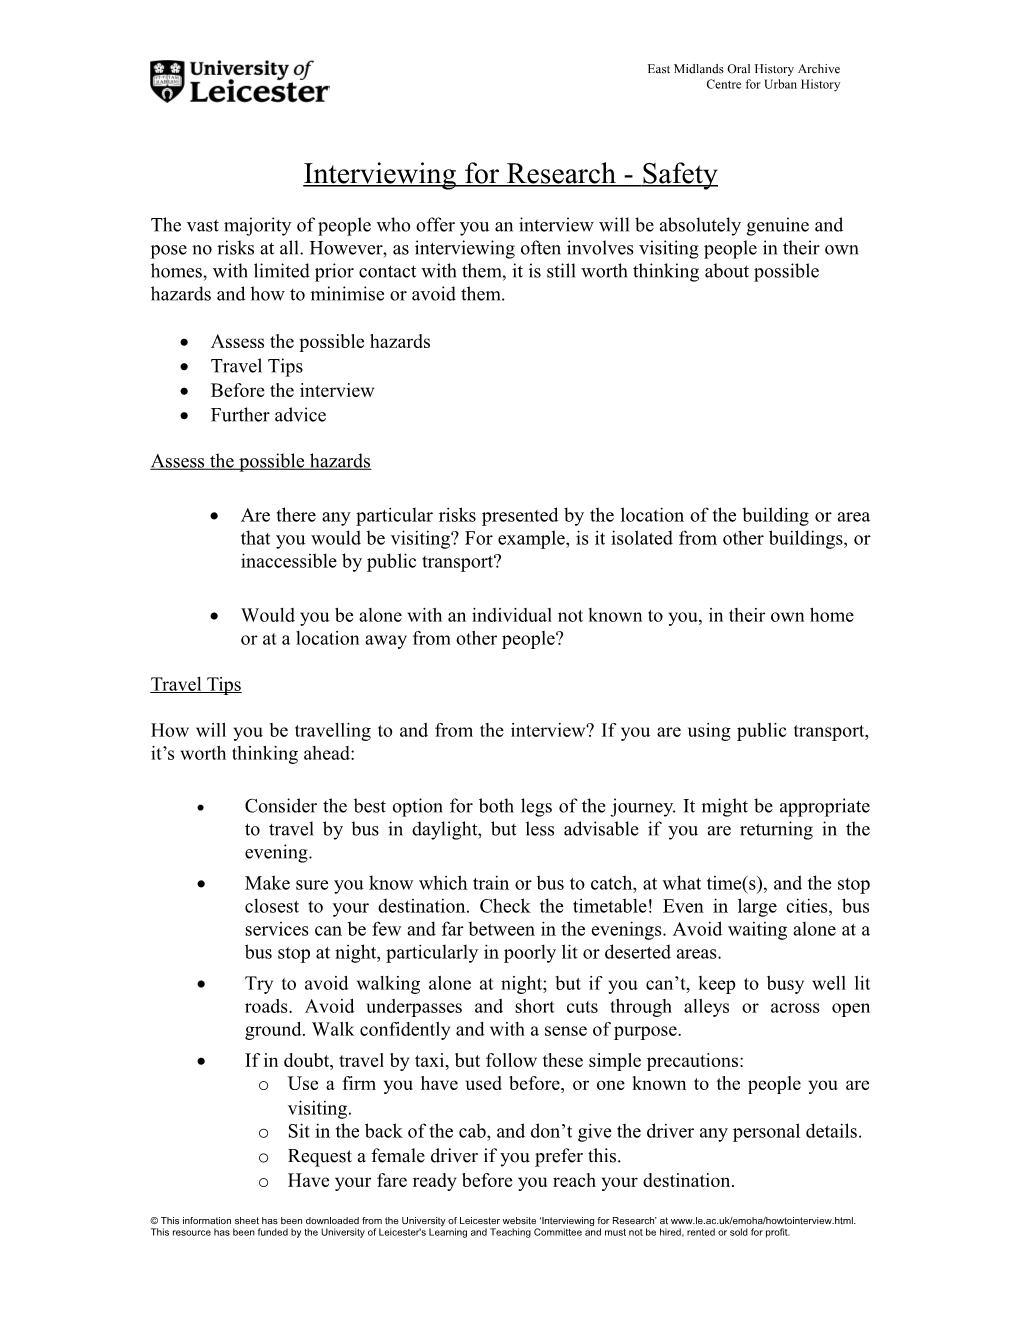 Some Guidance on Personal Safety When Carrying out Interviews